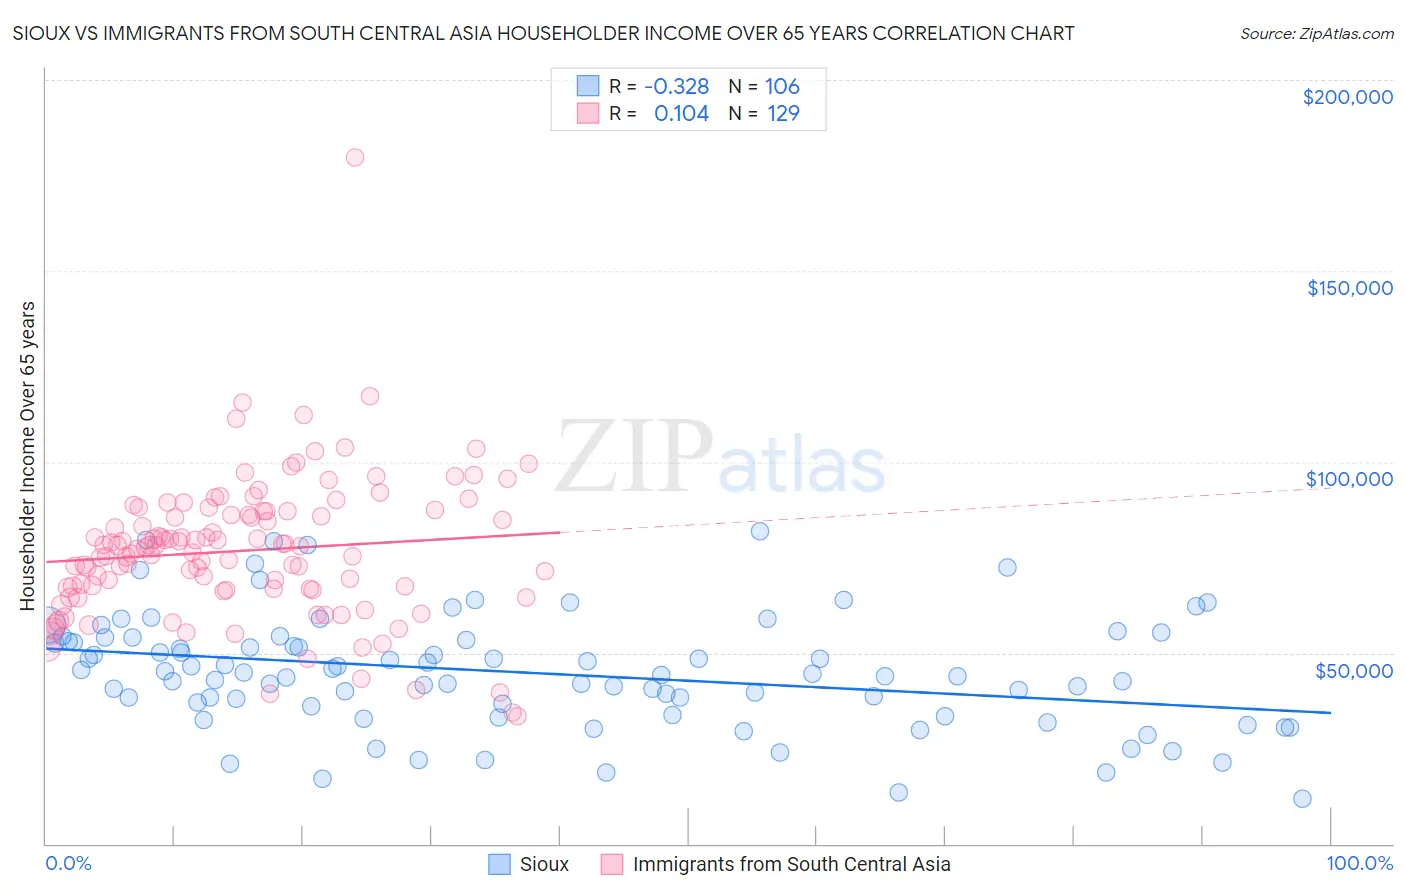 Sioux vs Immigrants from South Central Asia Householder Income Over 65 years